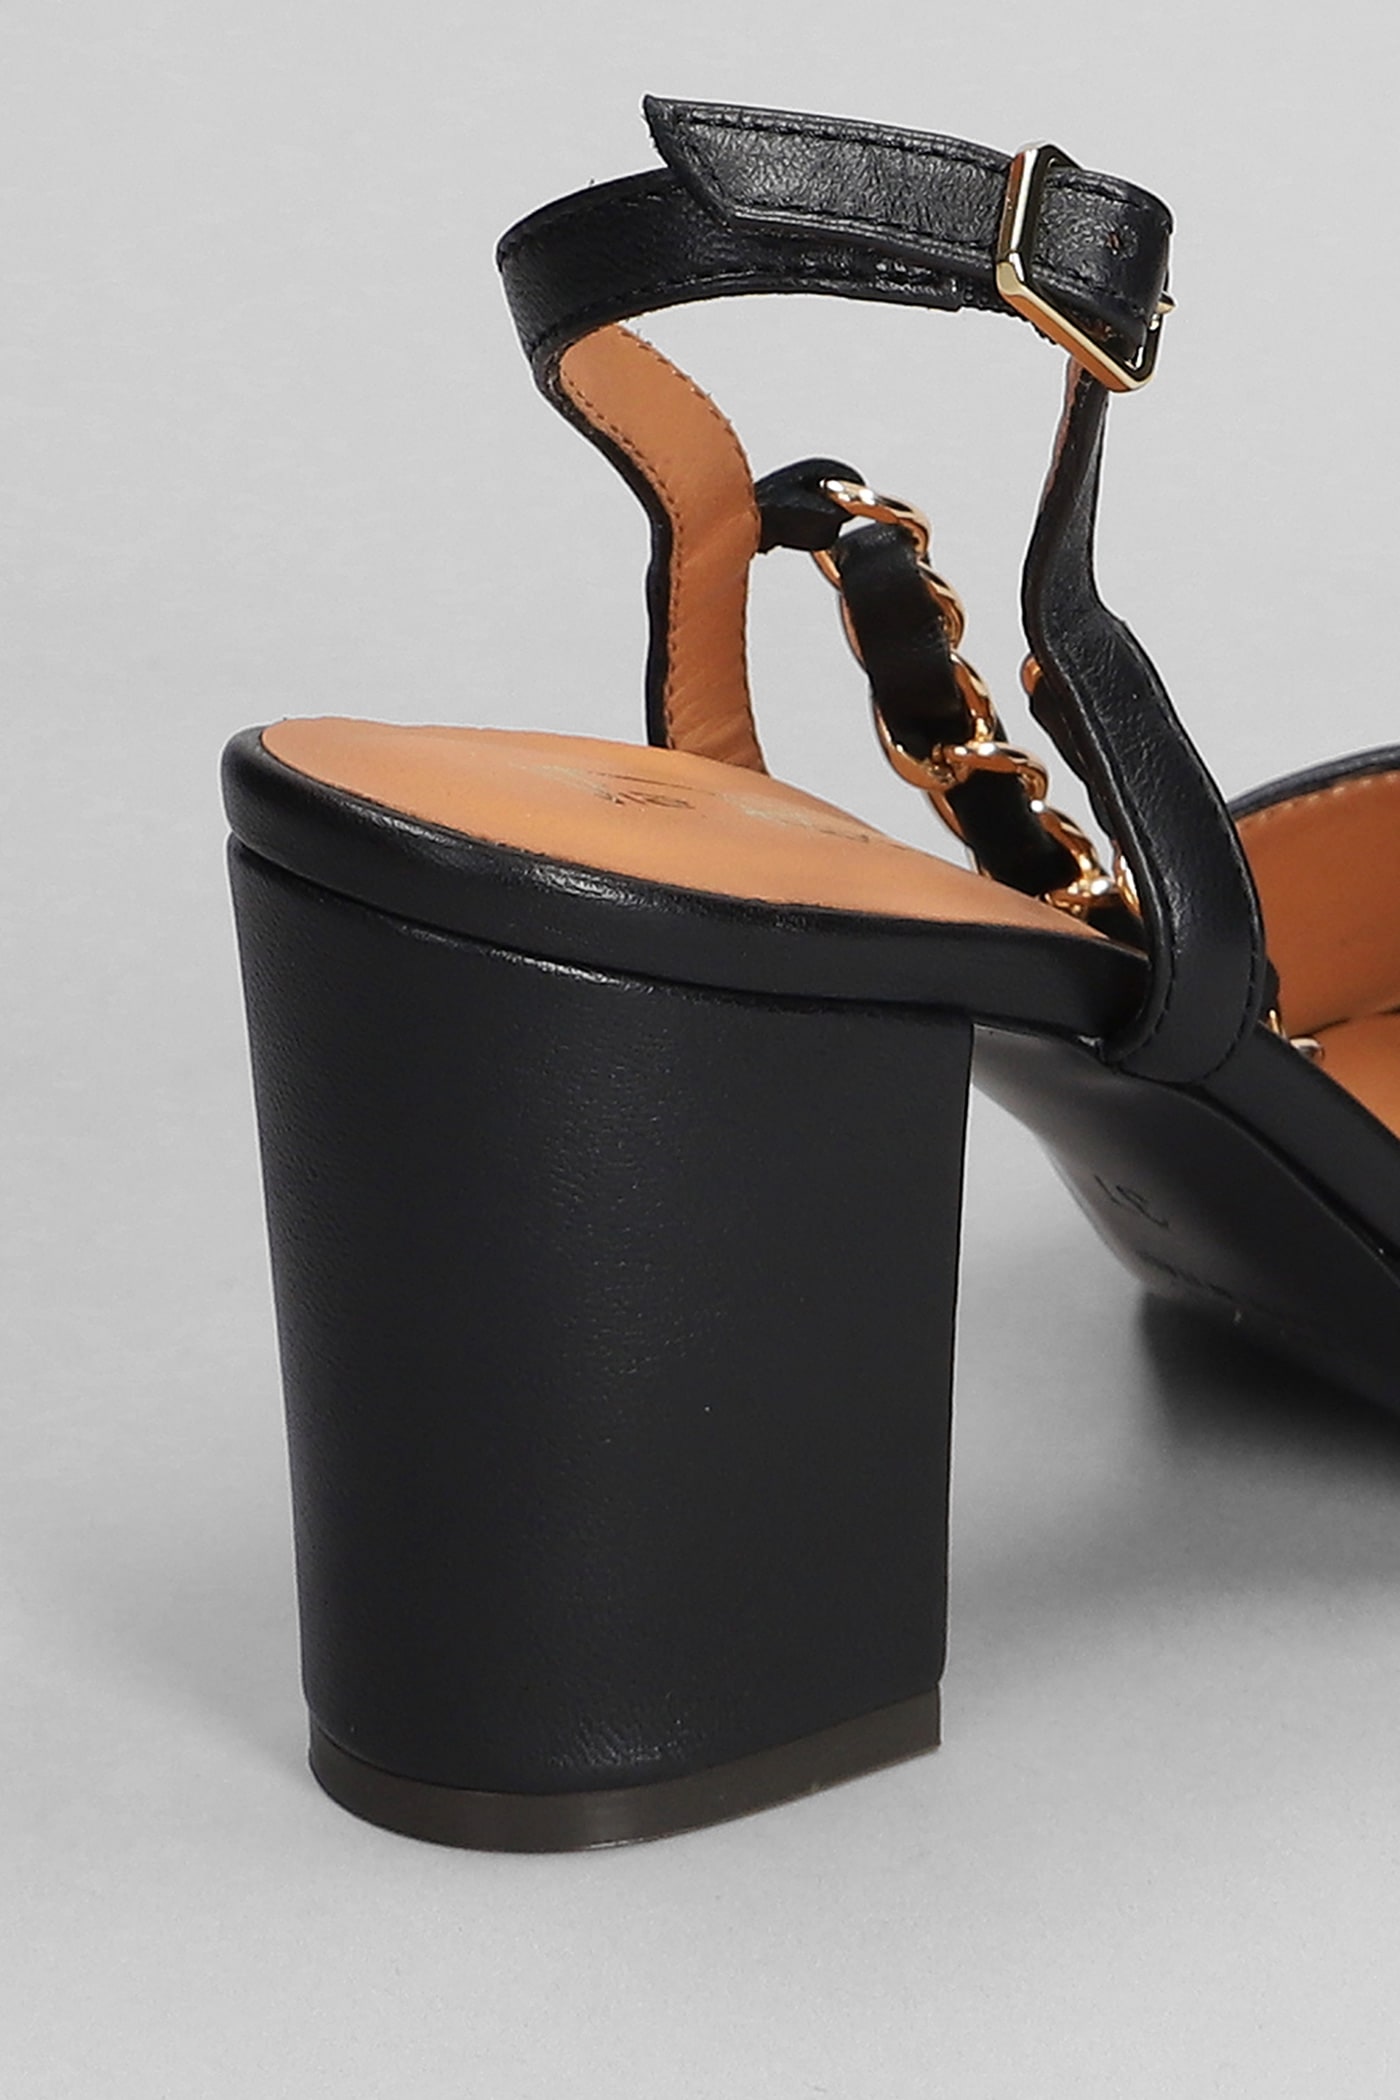 Shop Via Roma 15 Sandals In Black Leather